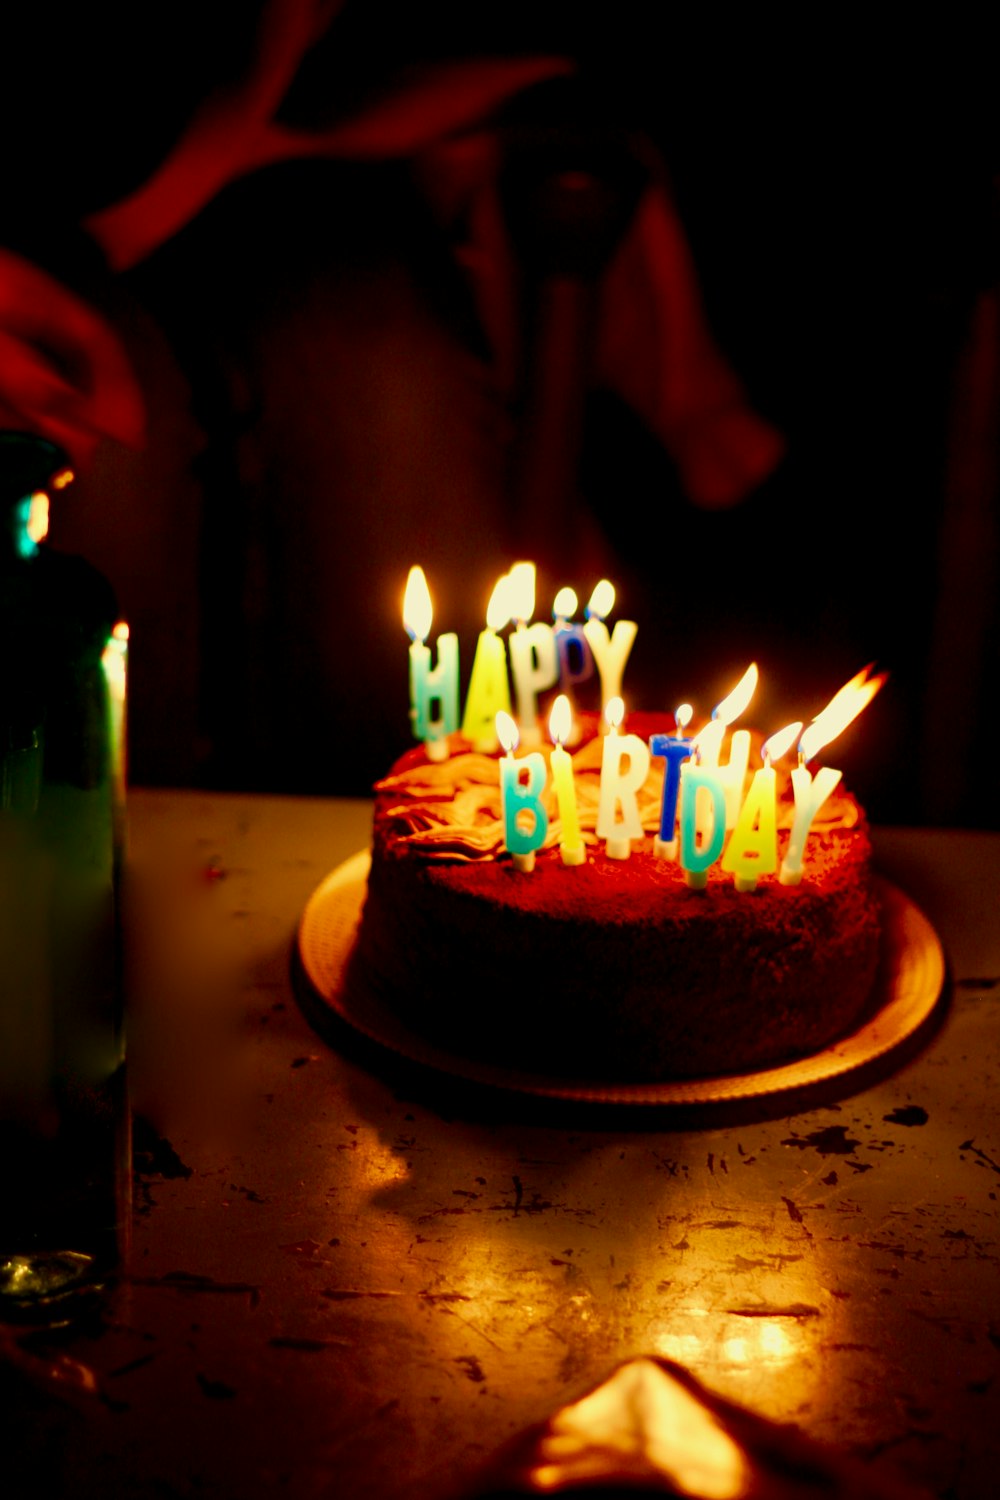 brown icing-covered cake with lighted candles